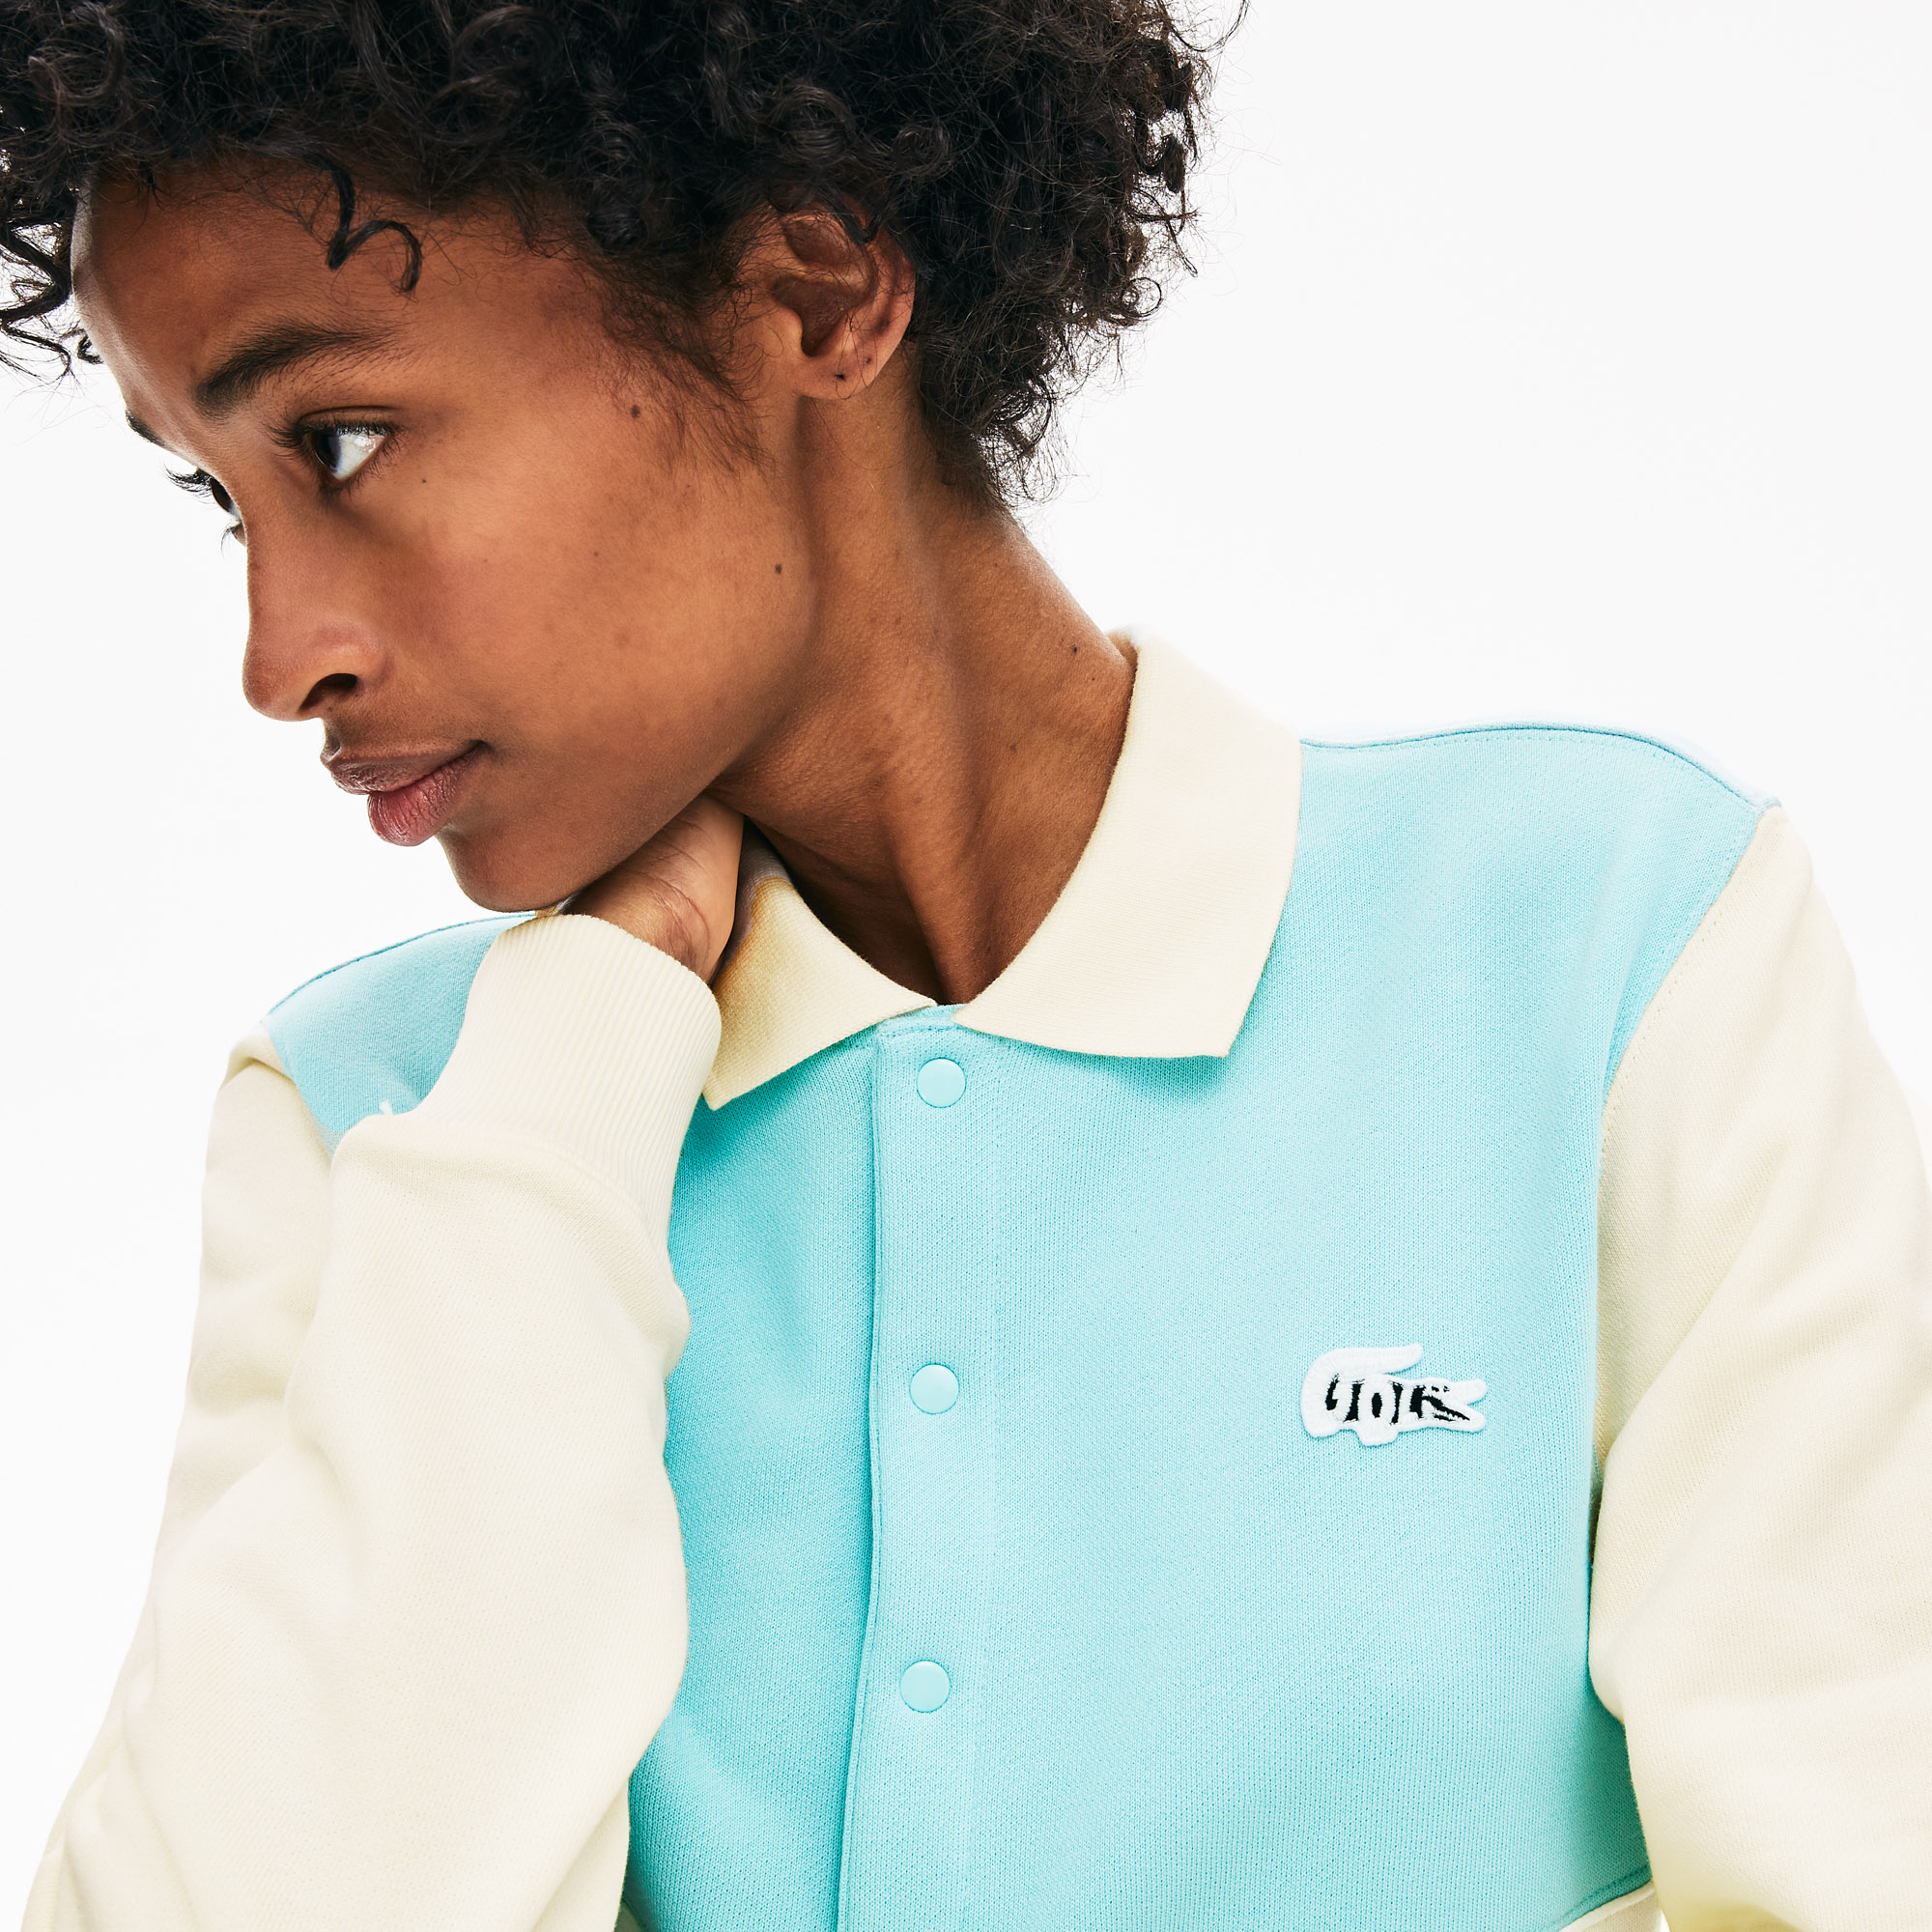 Lacoste x GOLF le FLEUR* Collection by Tyler, The Creator